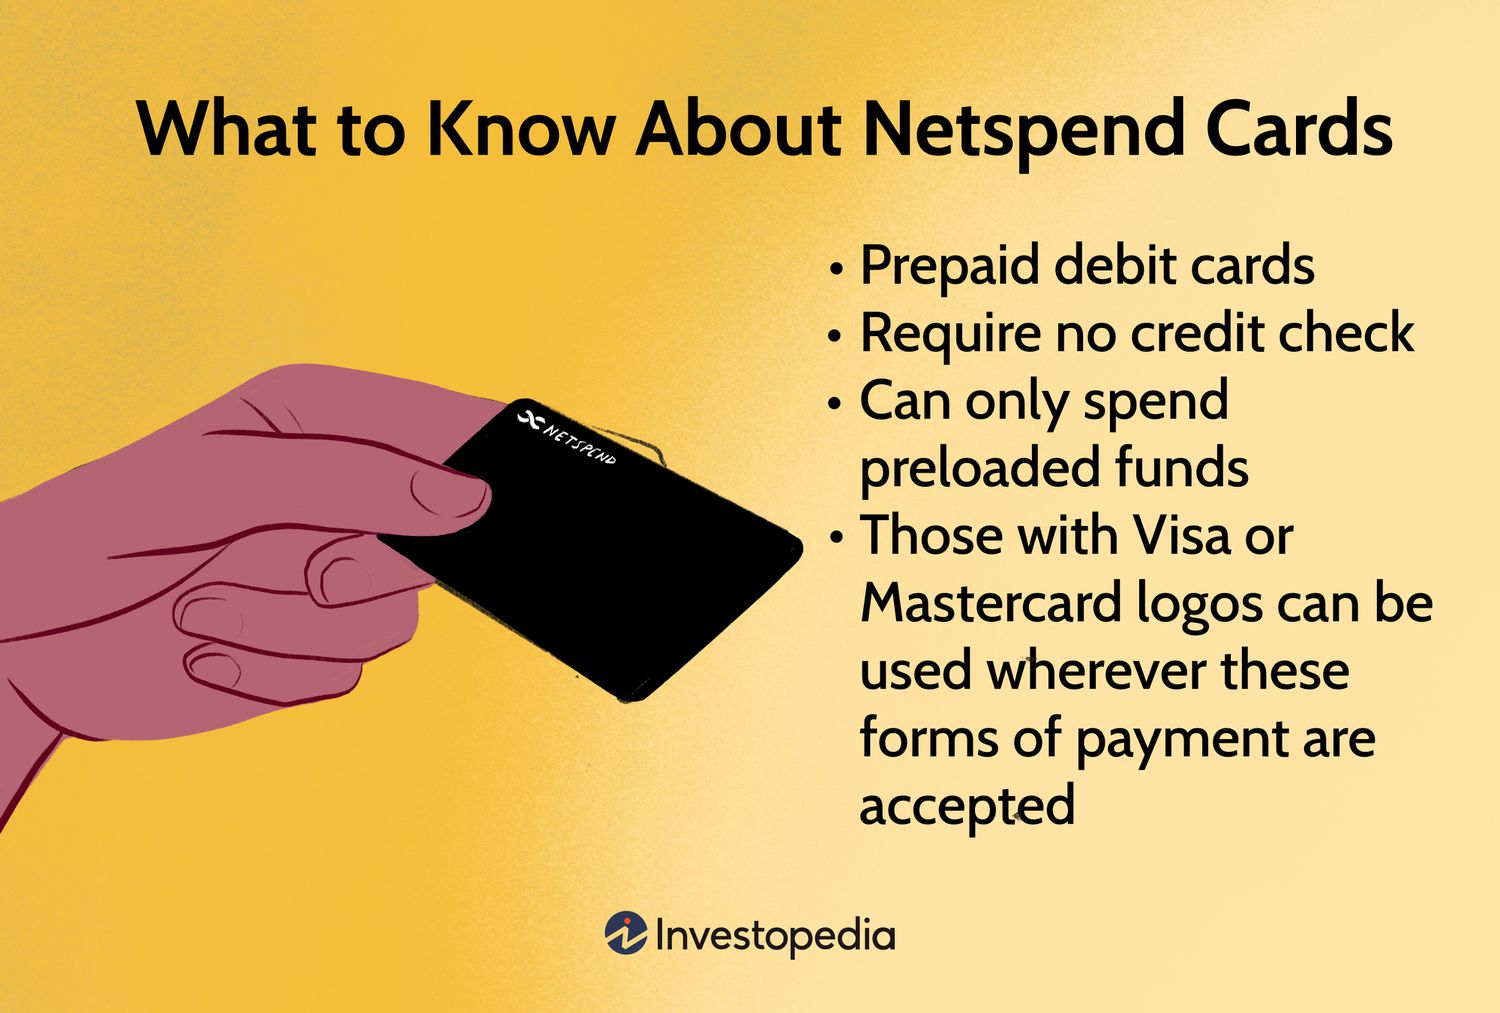 NetSpend Refunds | Federal Trade Commission